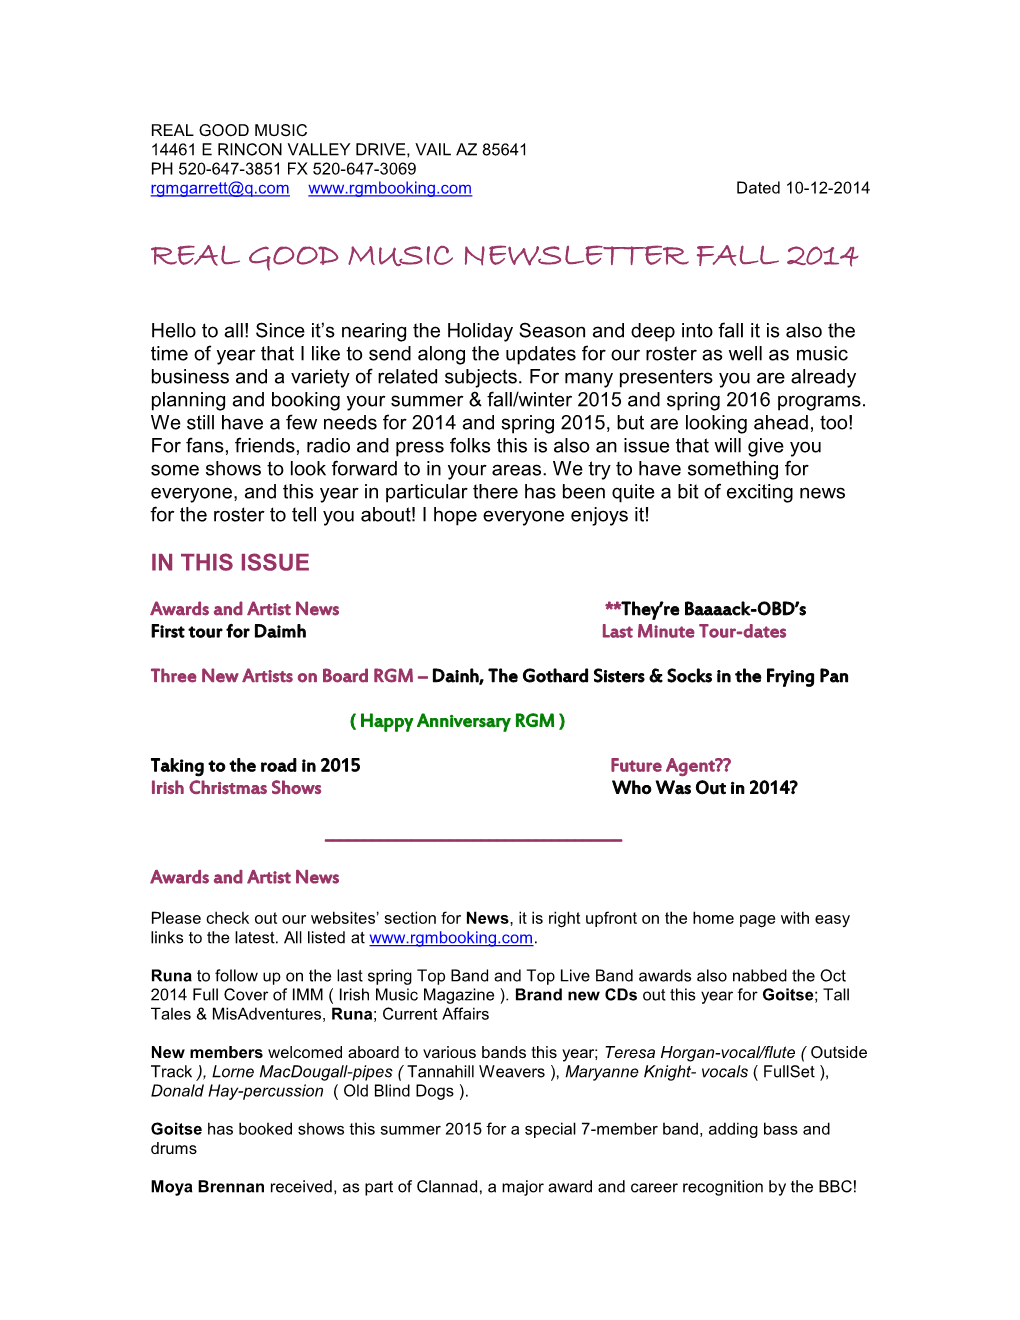 REAL GOOD MUSIC FALL 2014 NEWSLETTER.Pdf